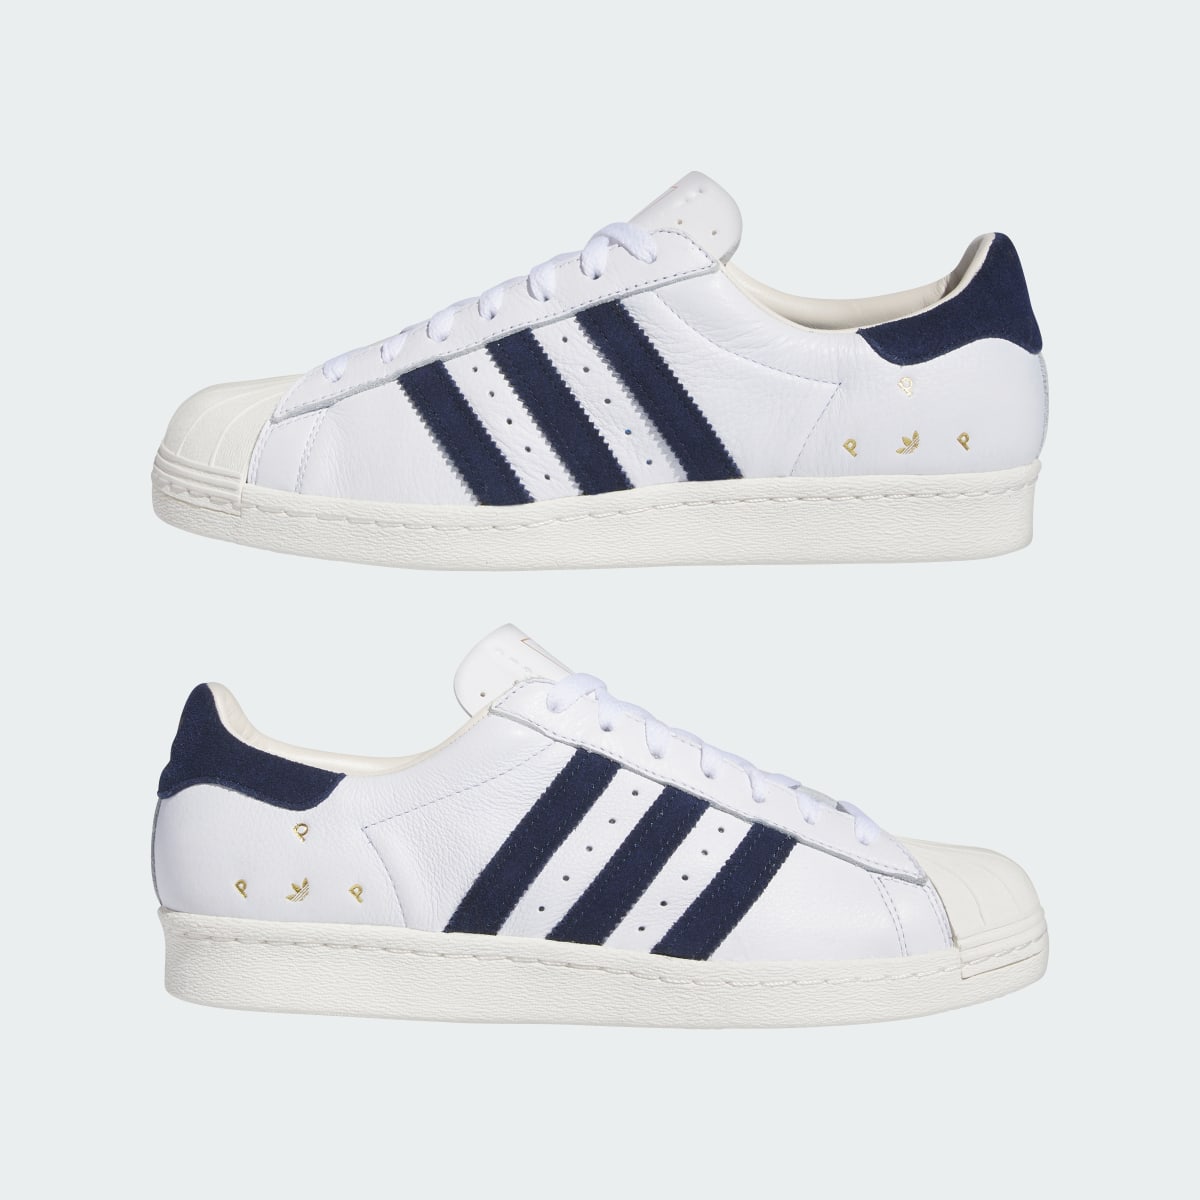 Adidas Pop Trading Co Superstar ADV Trainers. 9